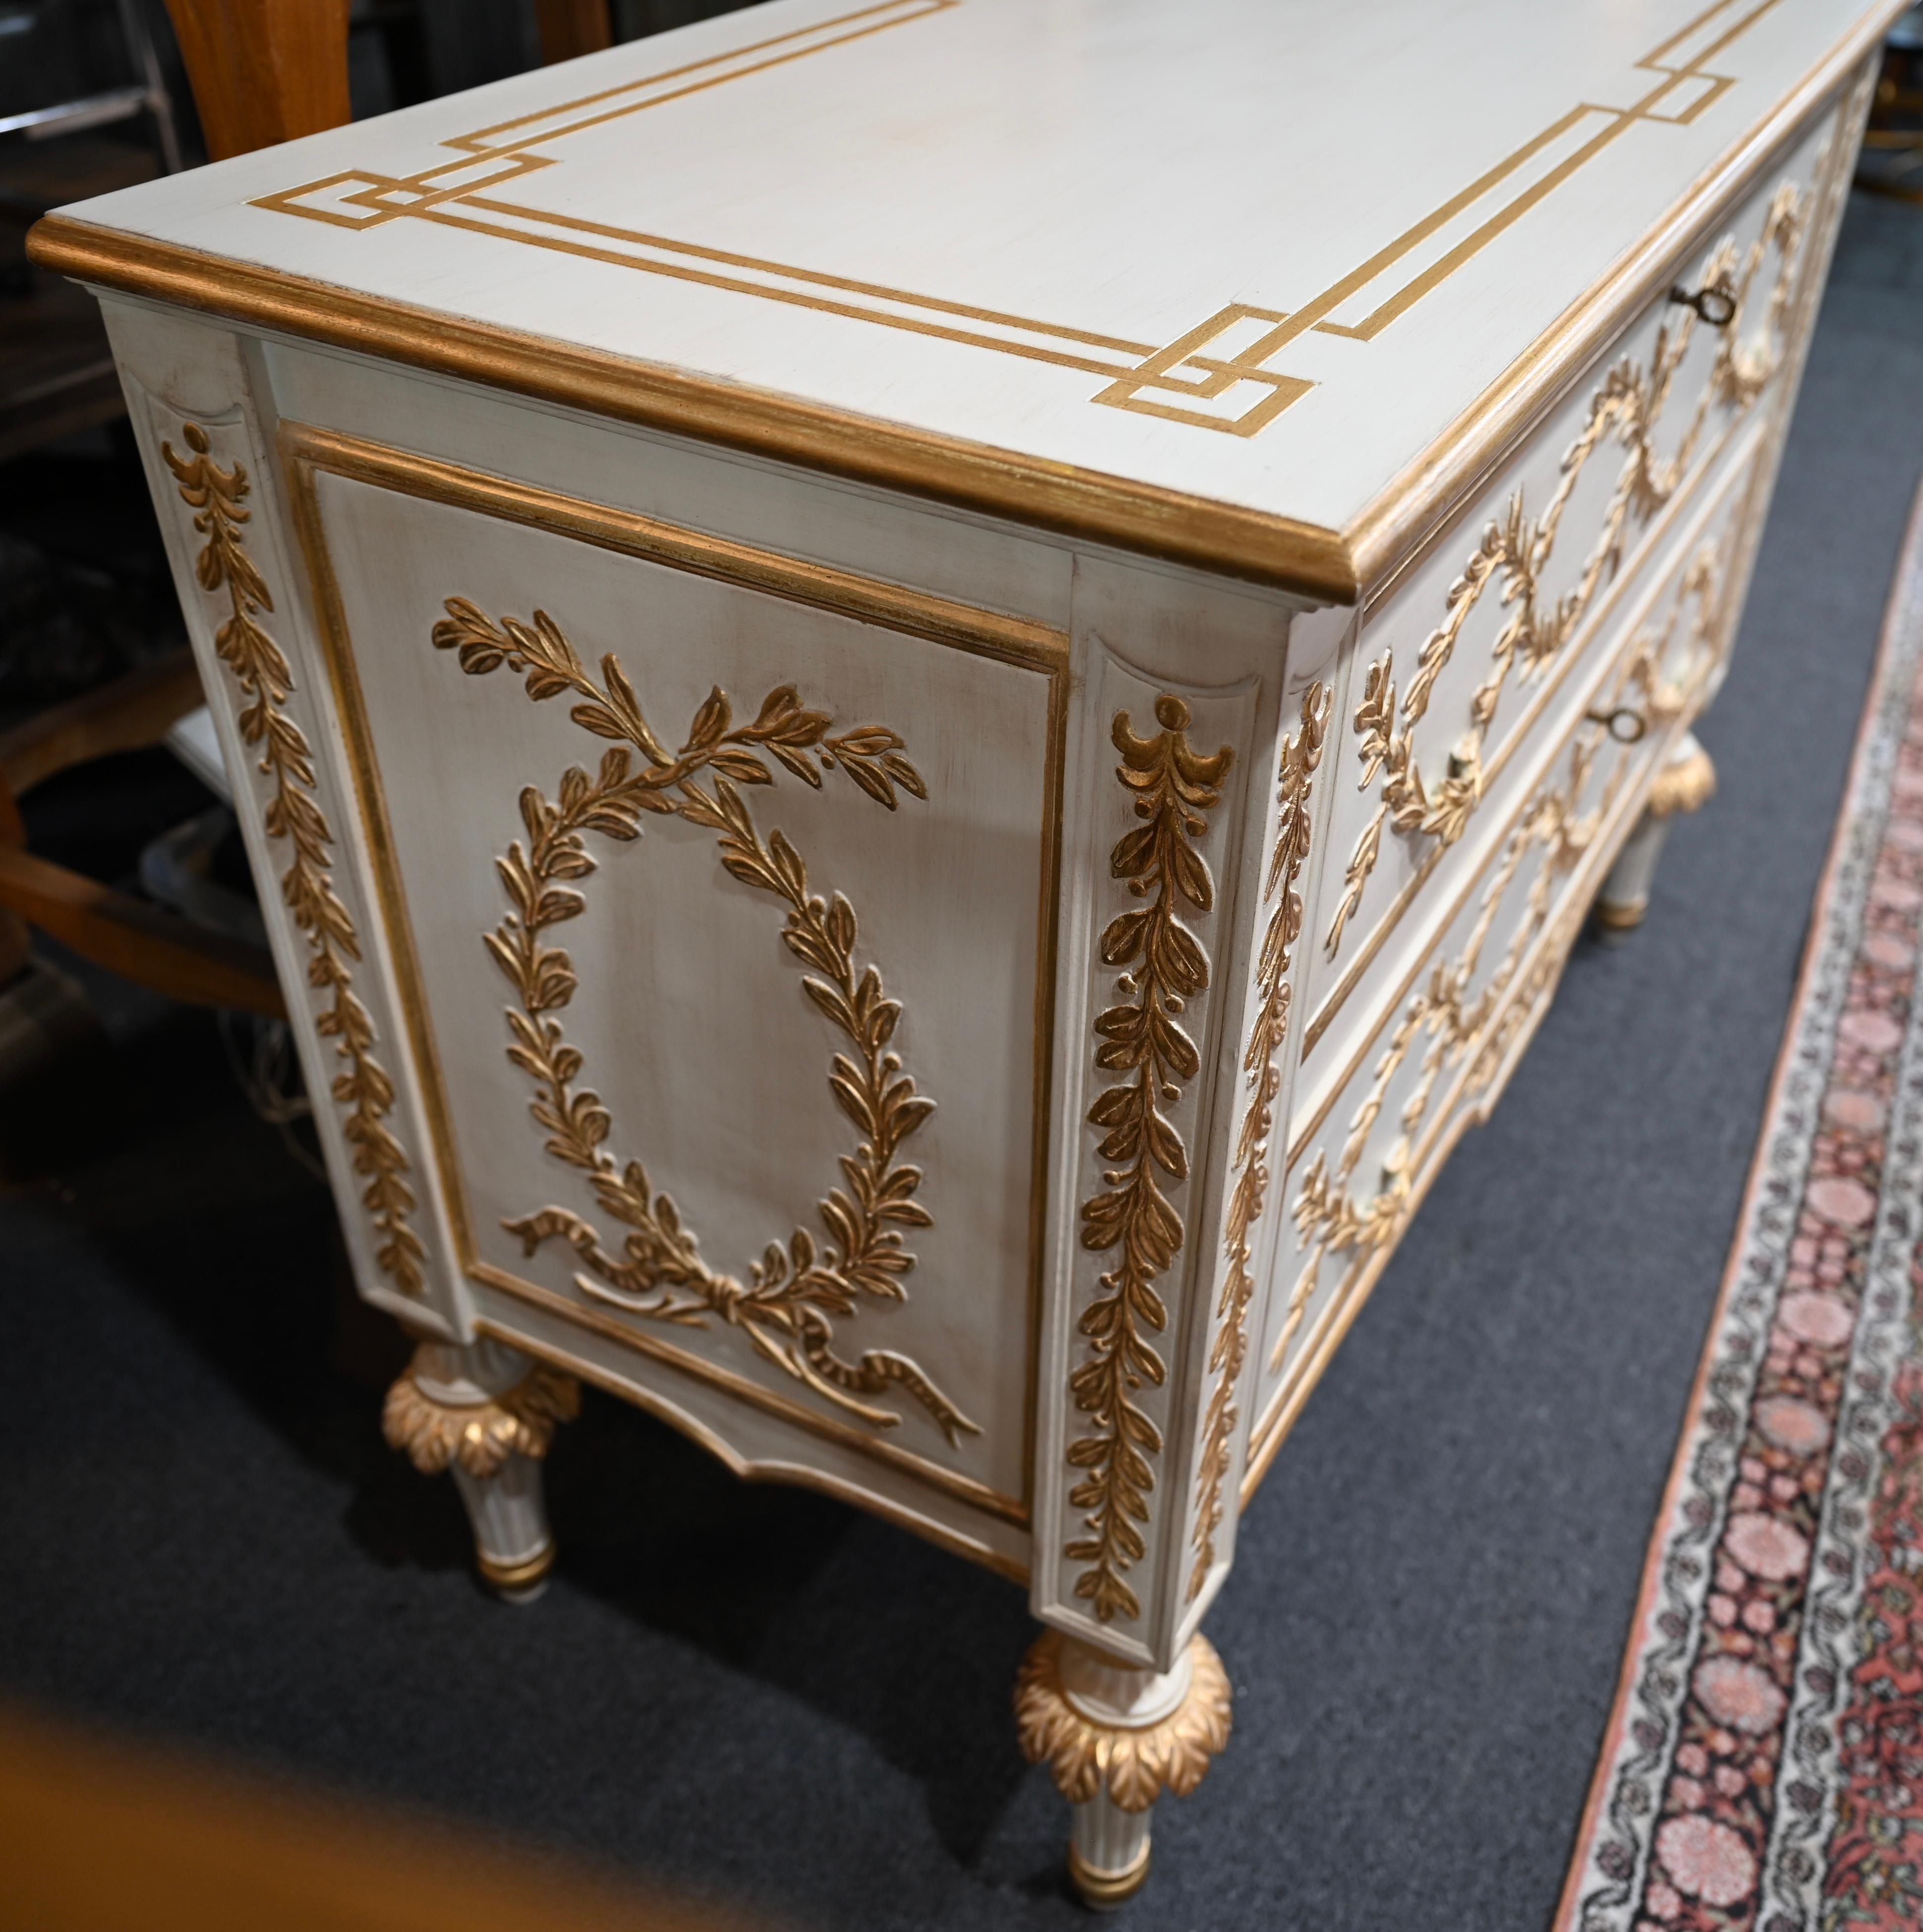 A fine Italian Neoclassical Louis XVI Style Chest of Drawers. This beautiful beige toned chest of drawers with gold leaf finished laurels is made in Florence, Italy. It embodies all the traditional details of very high quality Florentine furniture.